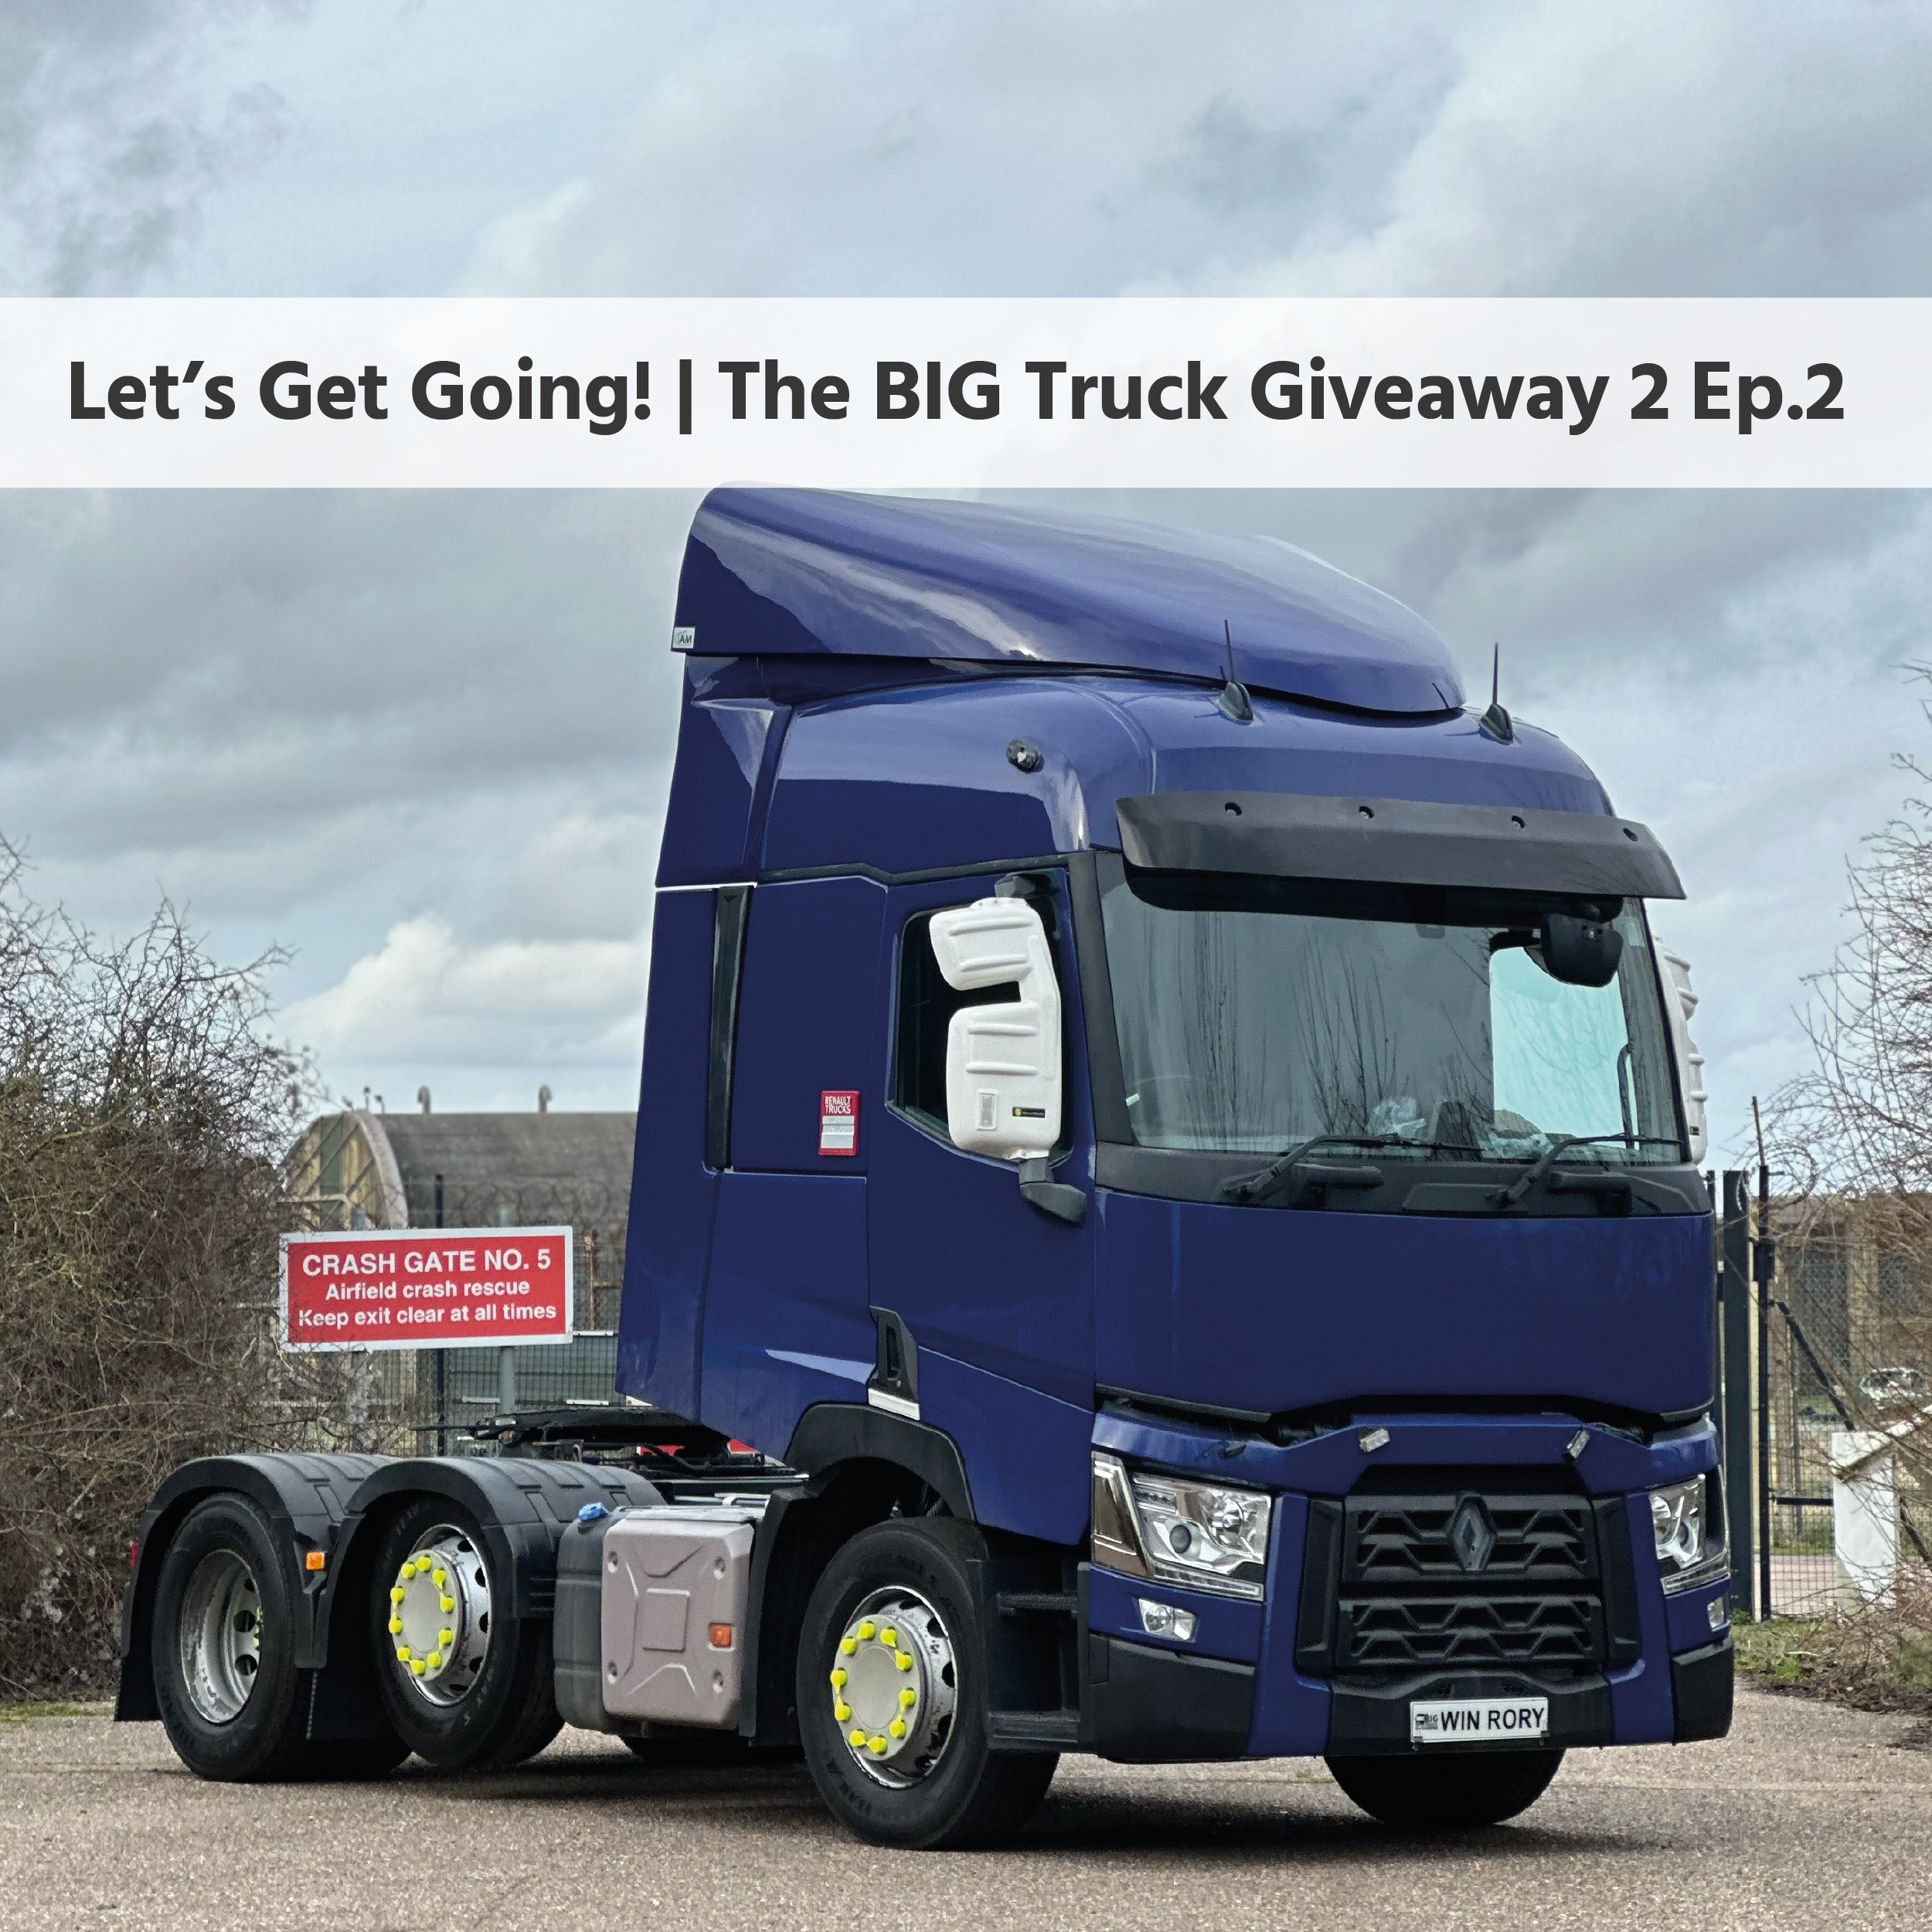 Let's Get Going! | The BIG Truck Giveaway 2 Episode 2